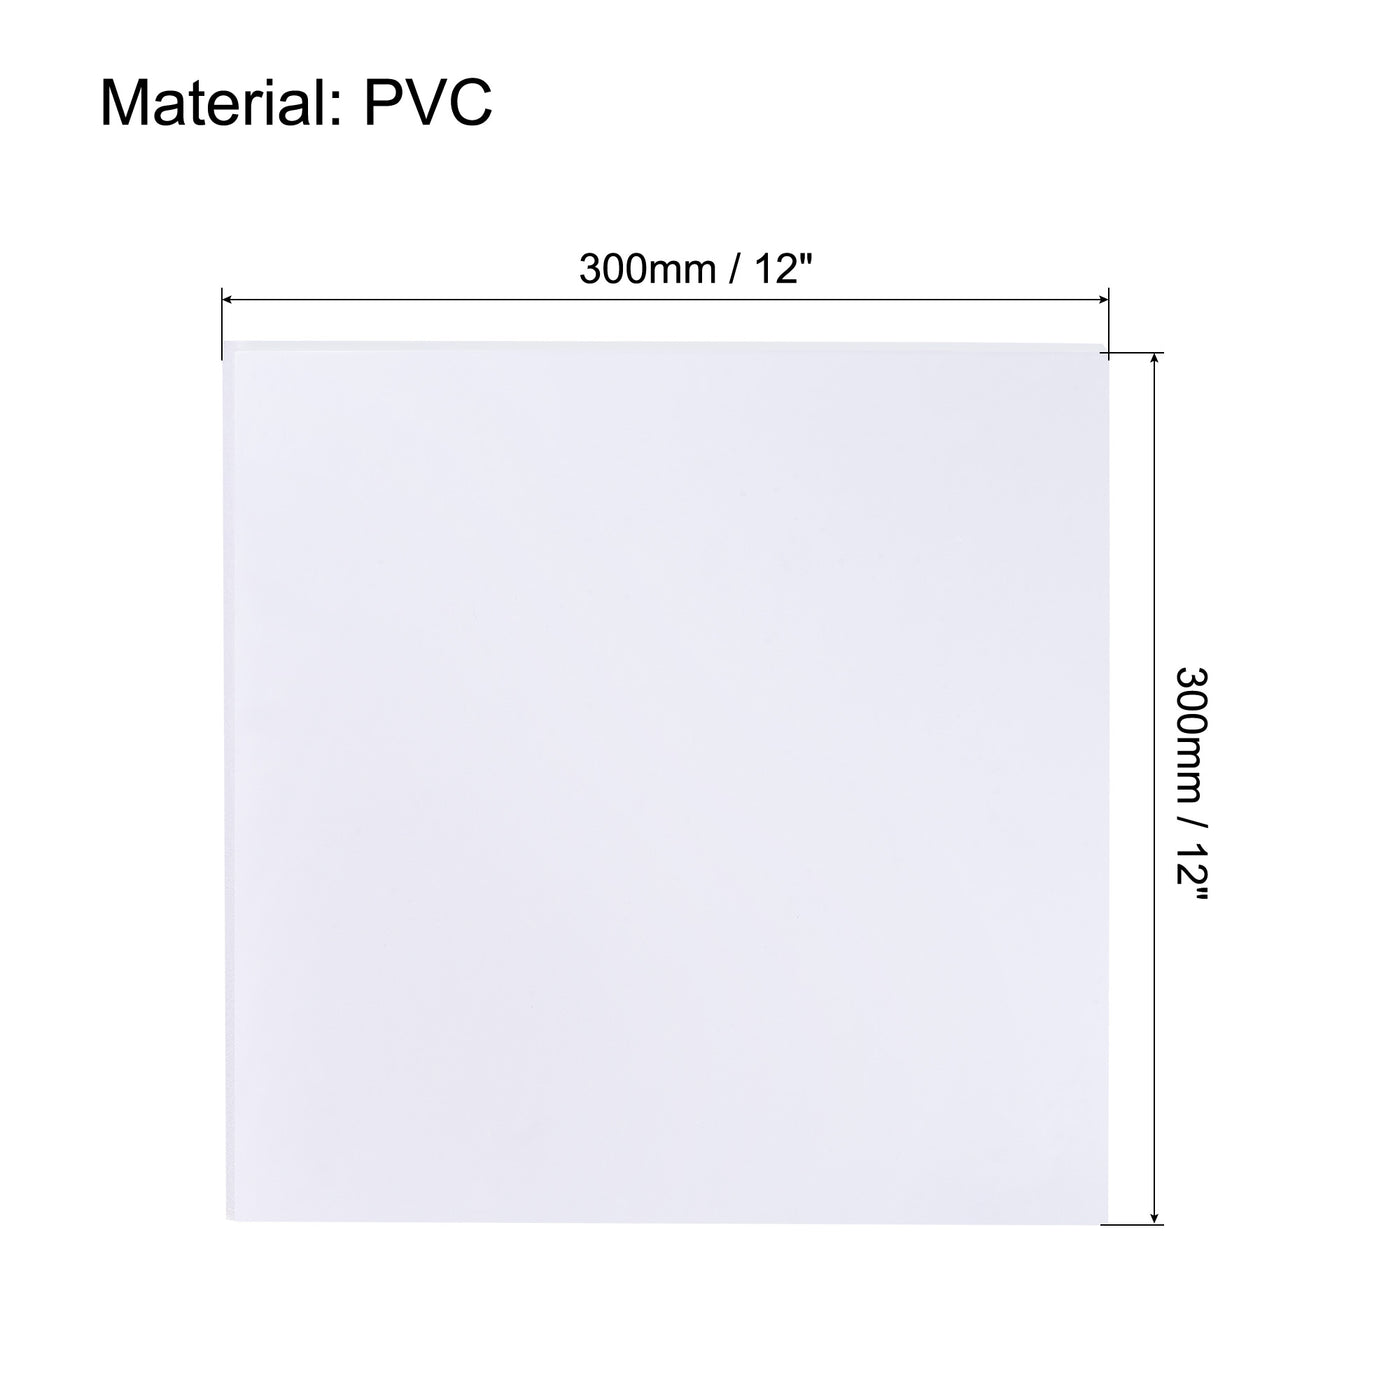 uxcell Uxcell PVC Foam Board Sheet,7mm x 300mm x 300mm,White,Double Sided,Expanded PVC Sheet